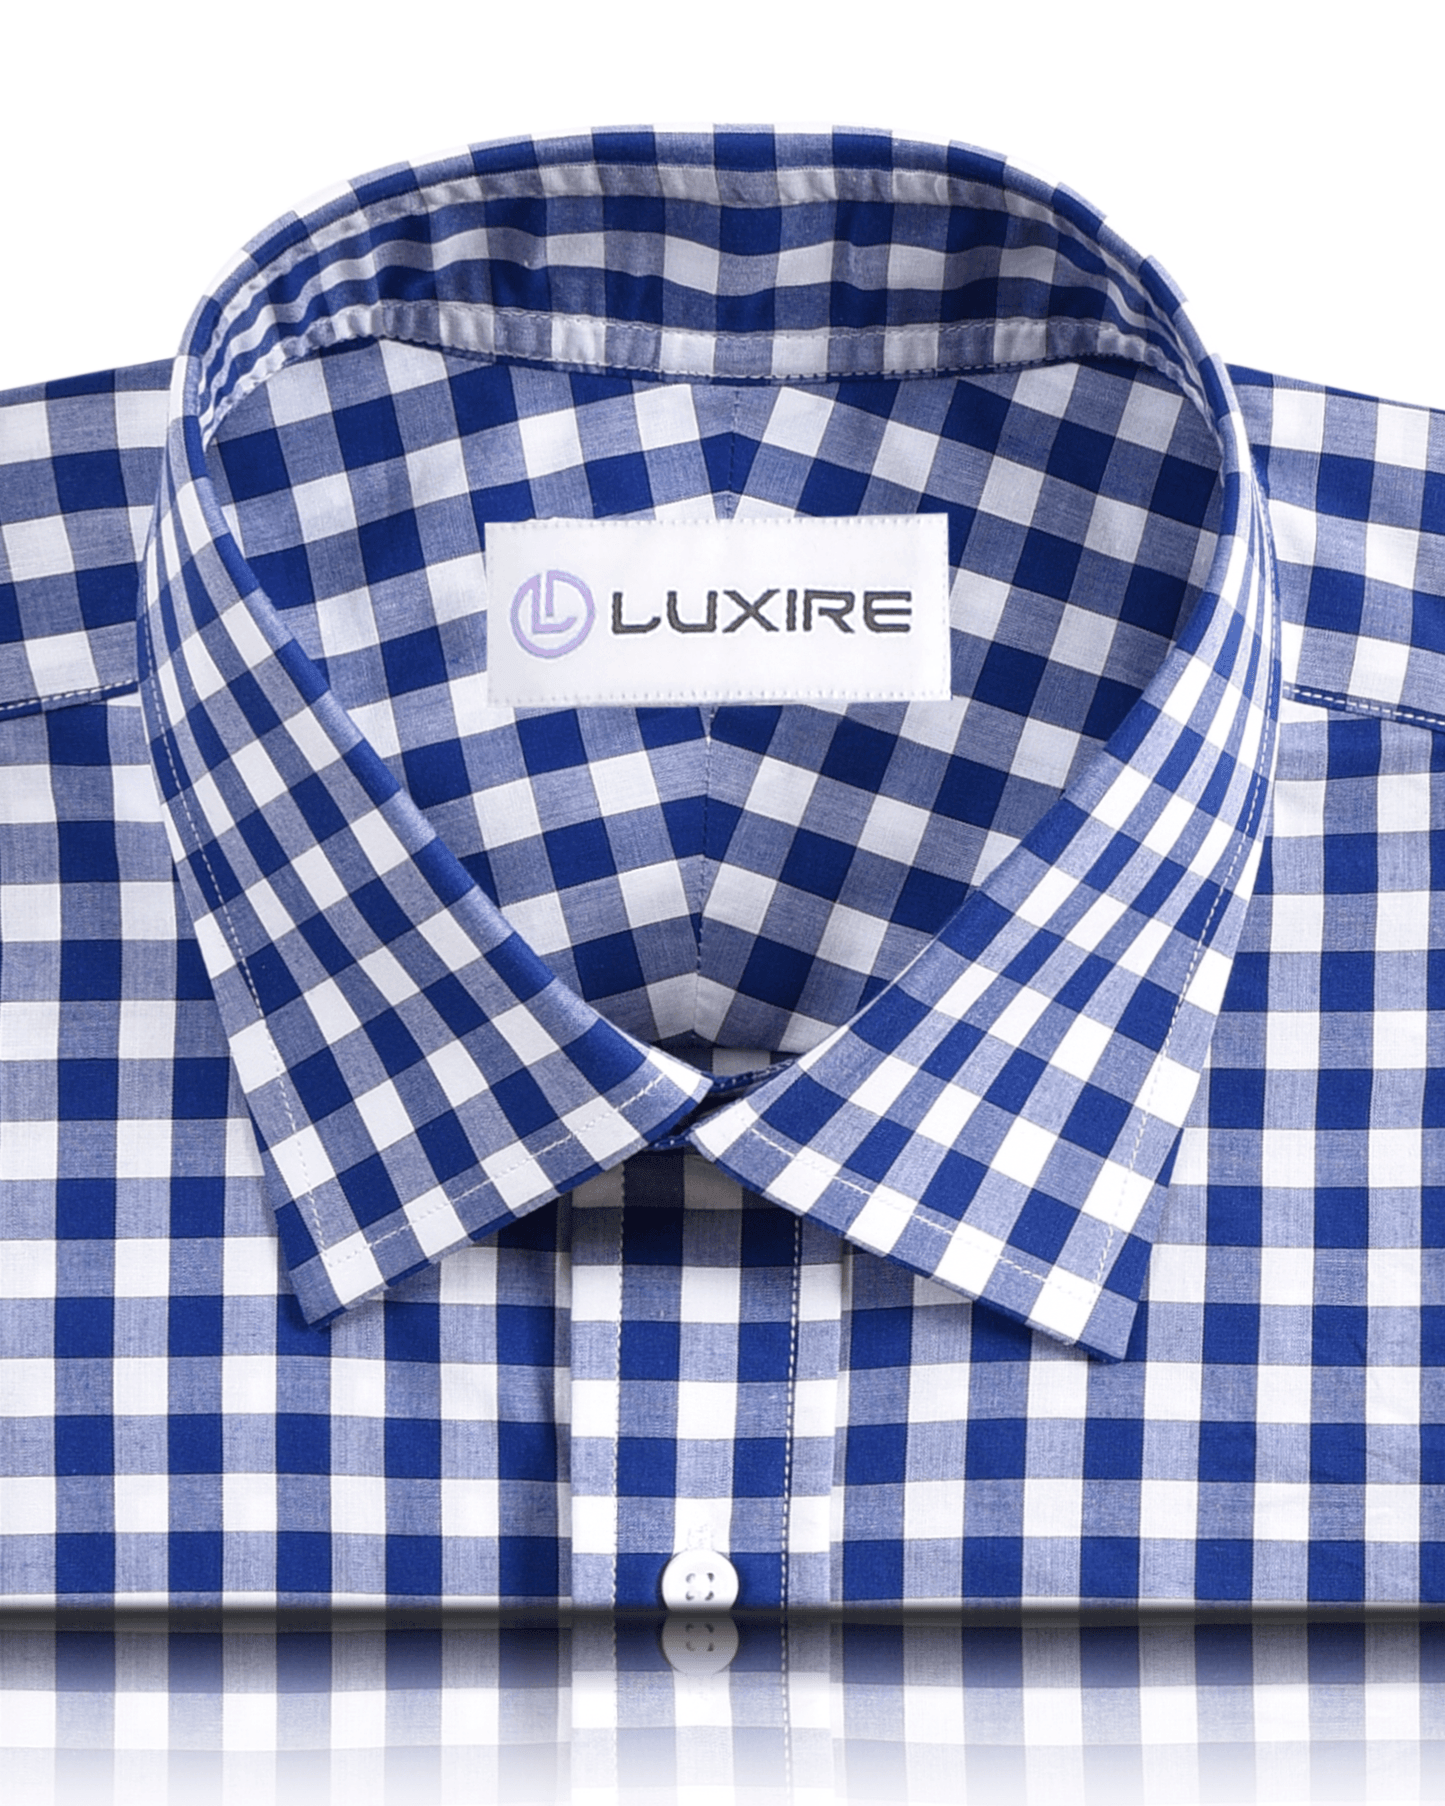 Front close view of custom check shirts for men by Luxire blue gingham checks on white